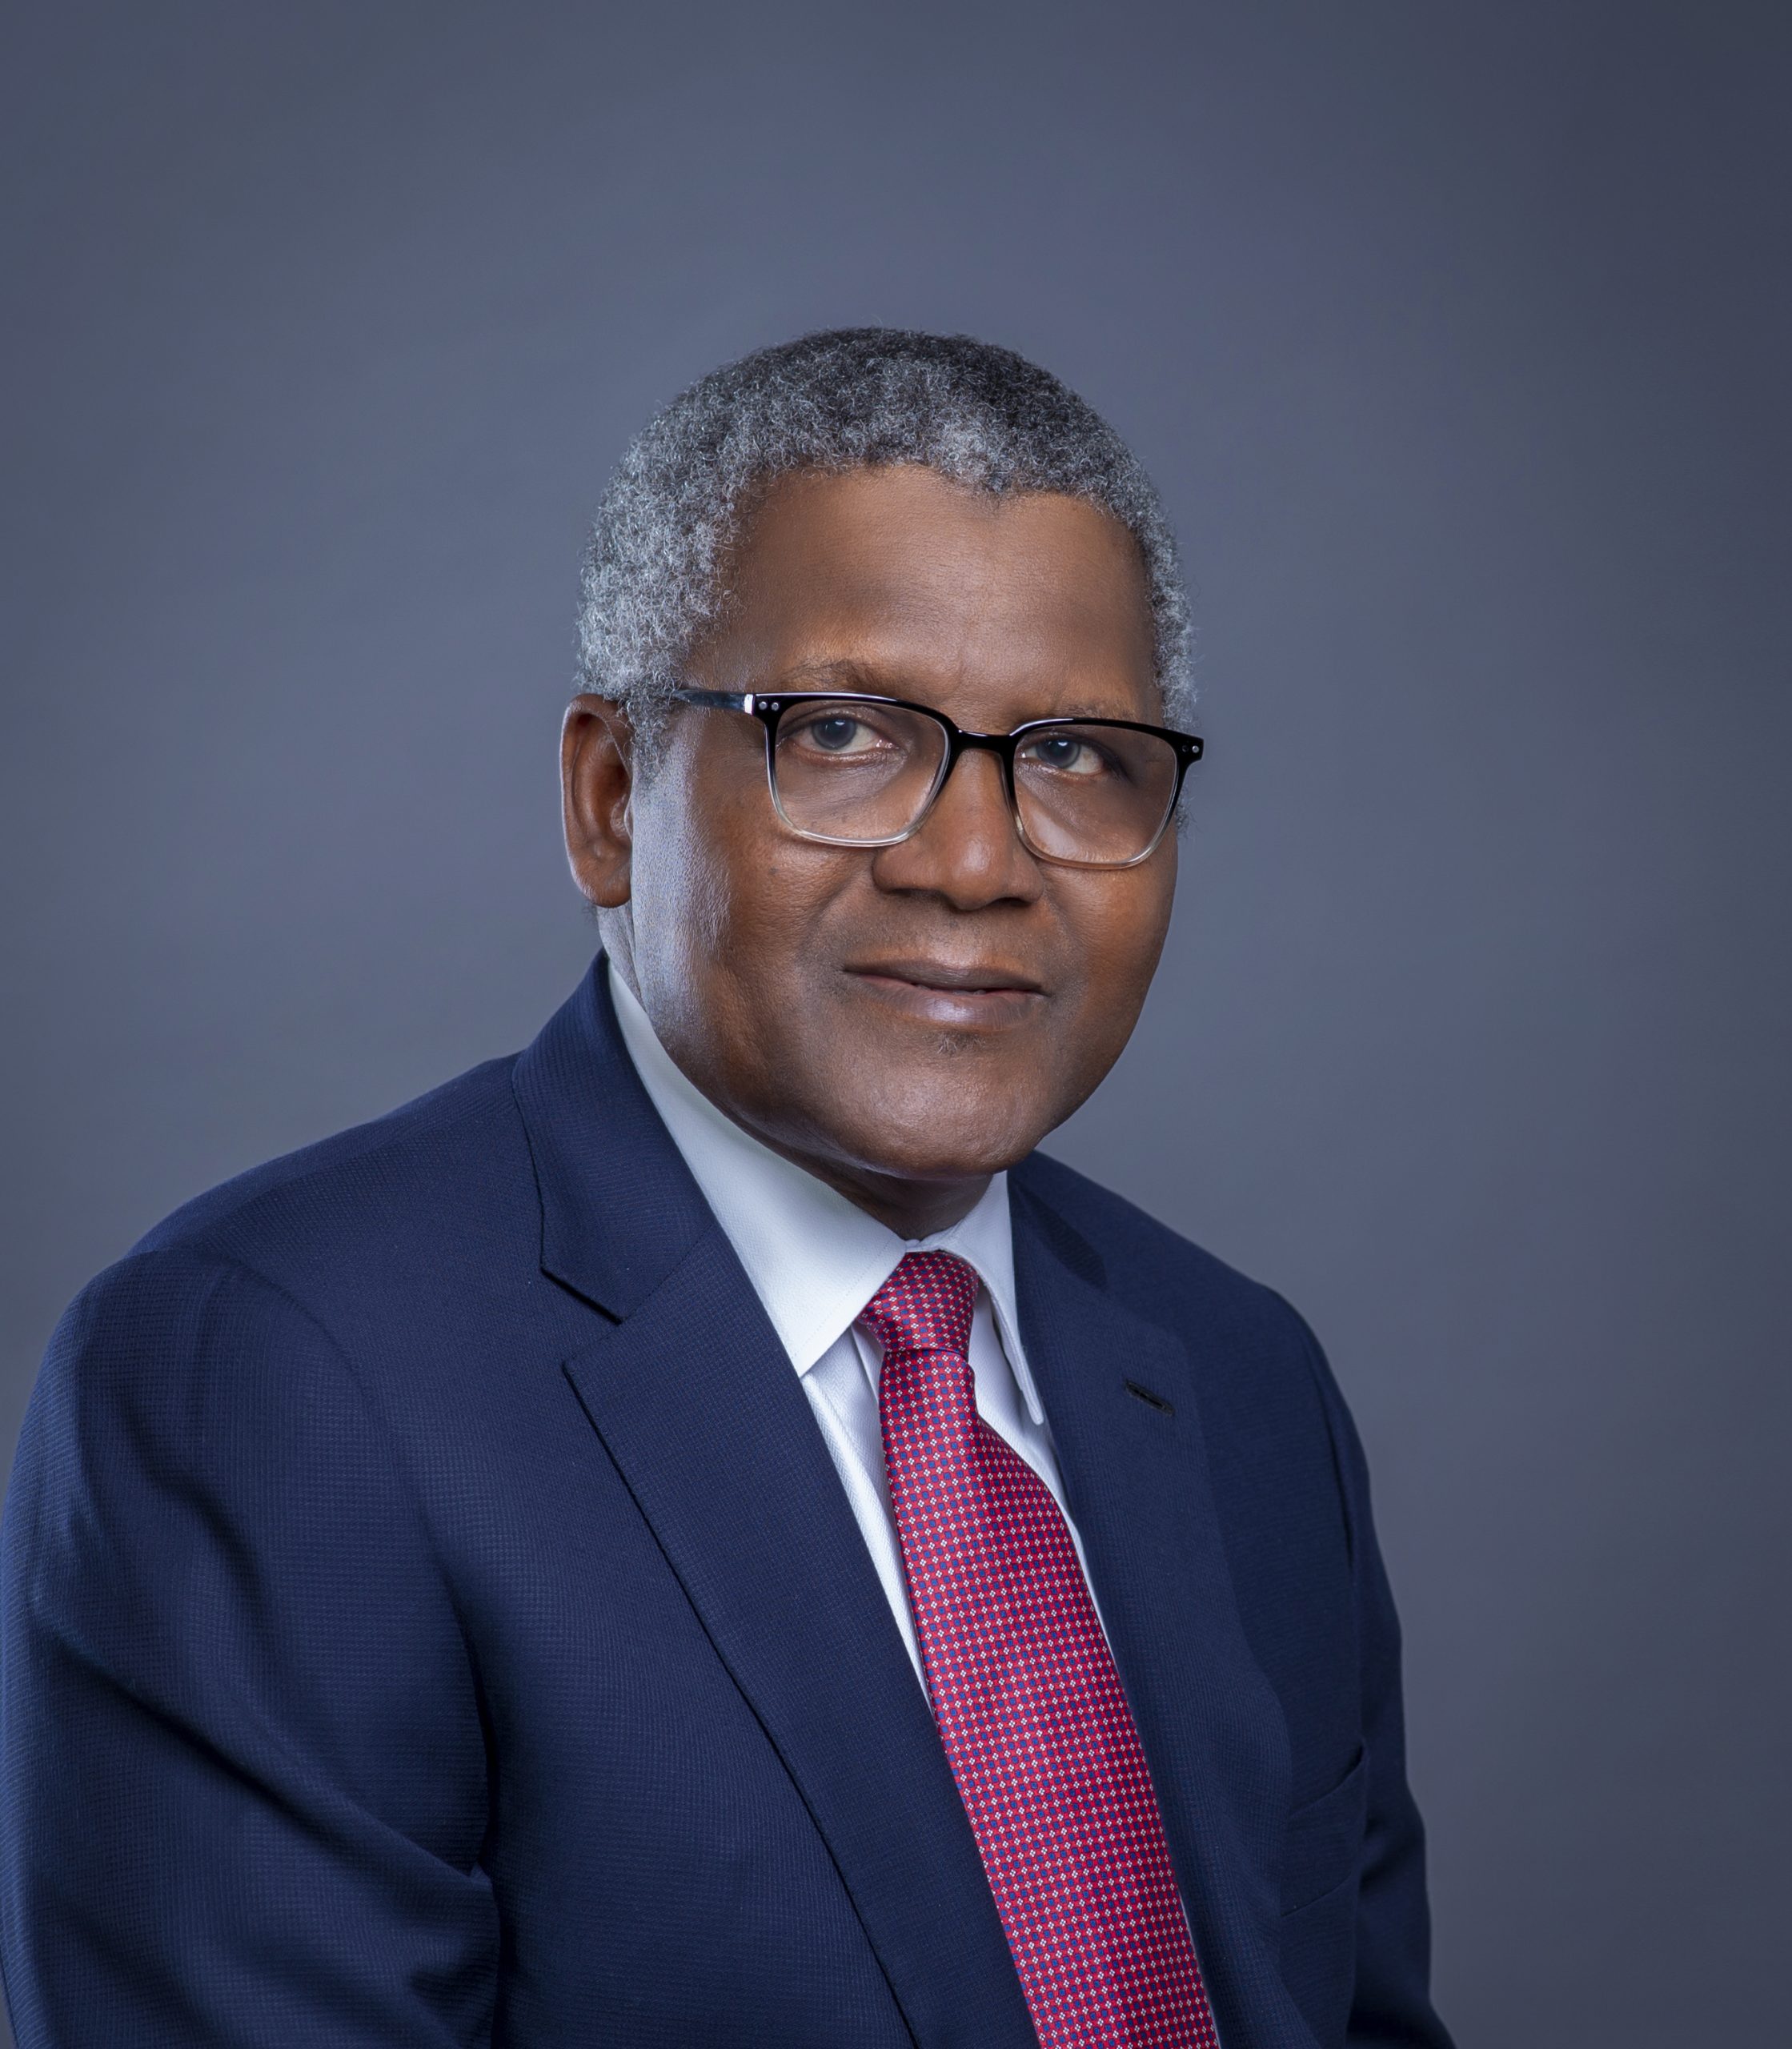 Dangote reacts to EFCC’s visit to its Headquarters